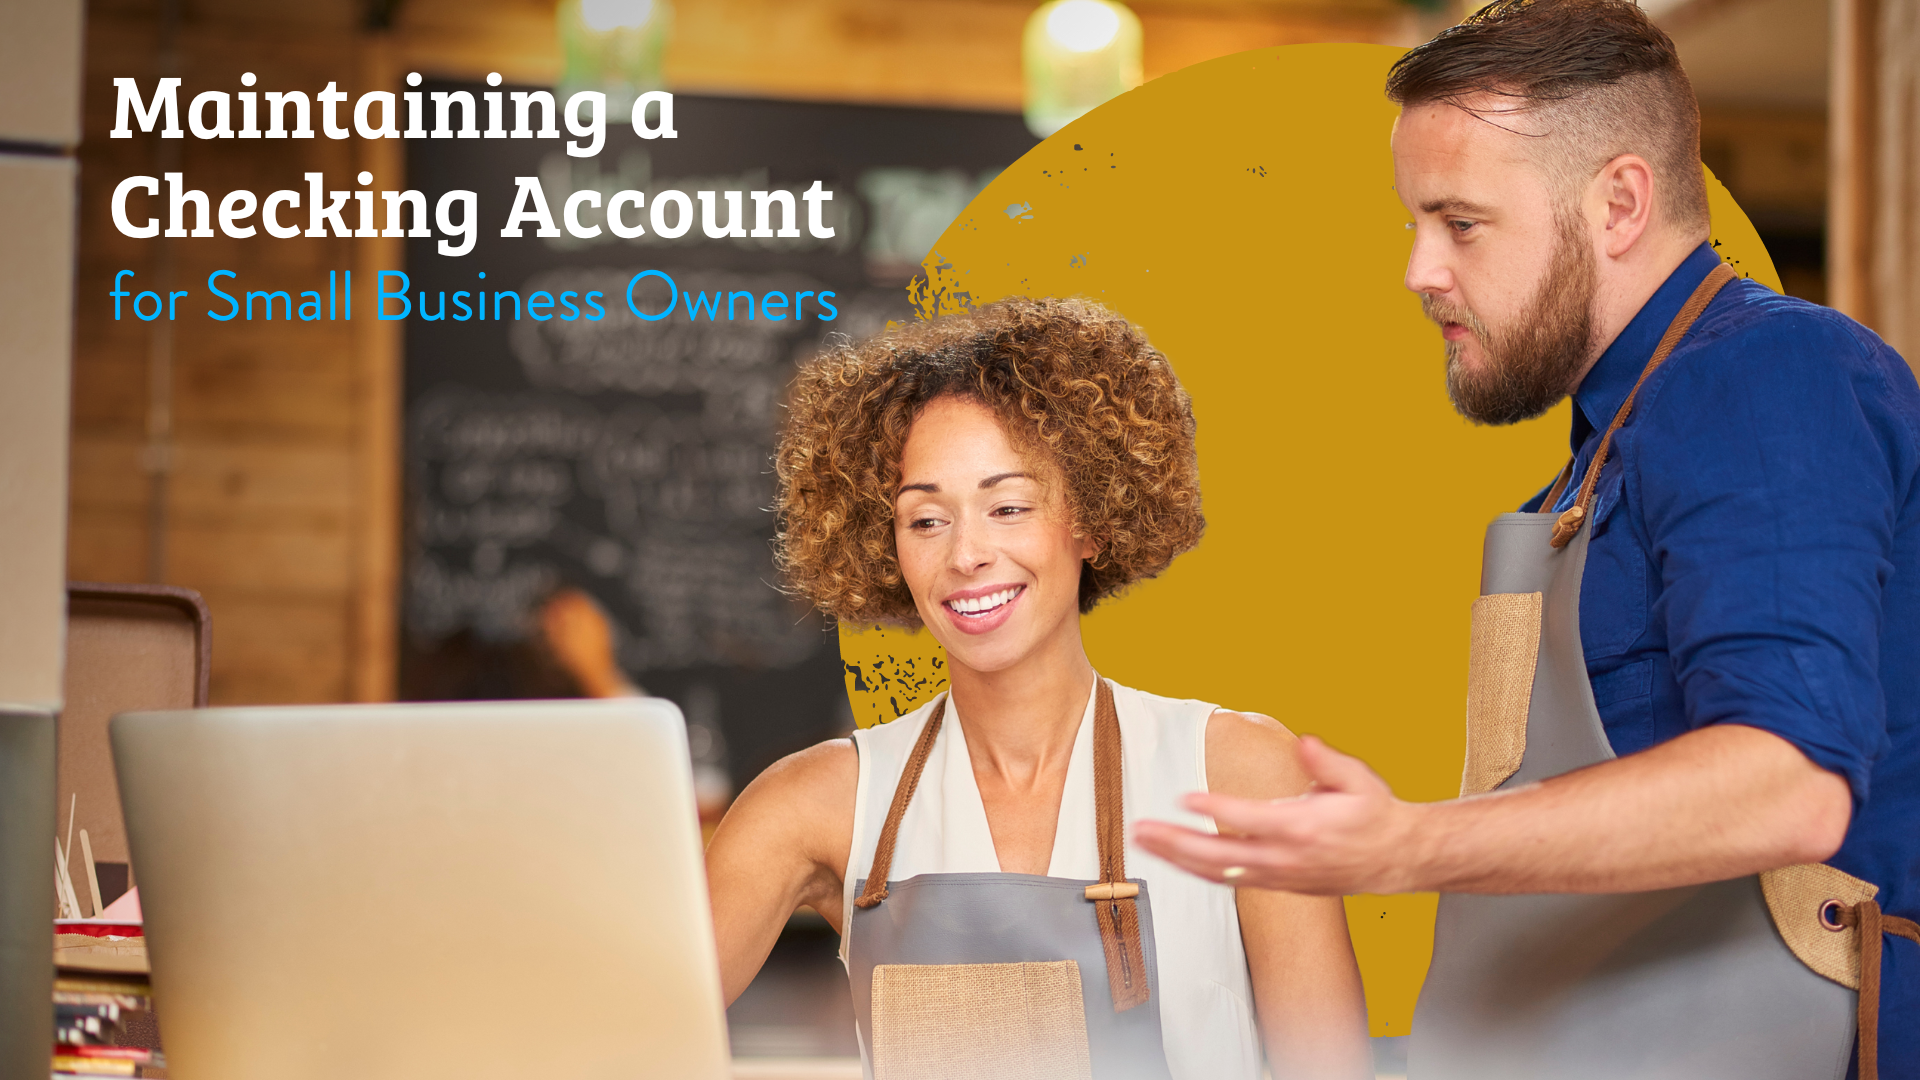 Small Business Owners Maintaining A Checking Account